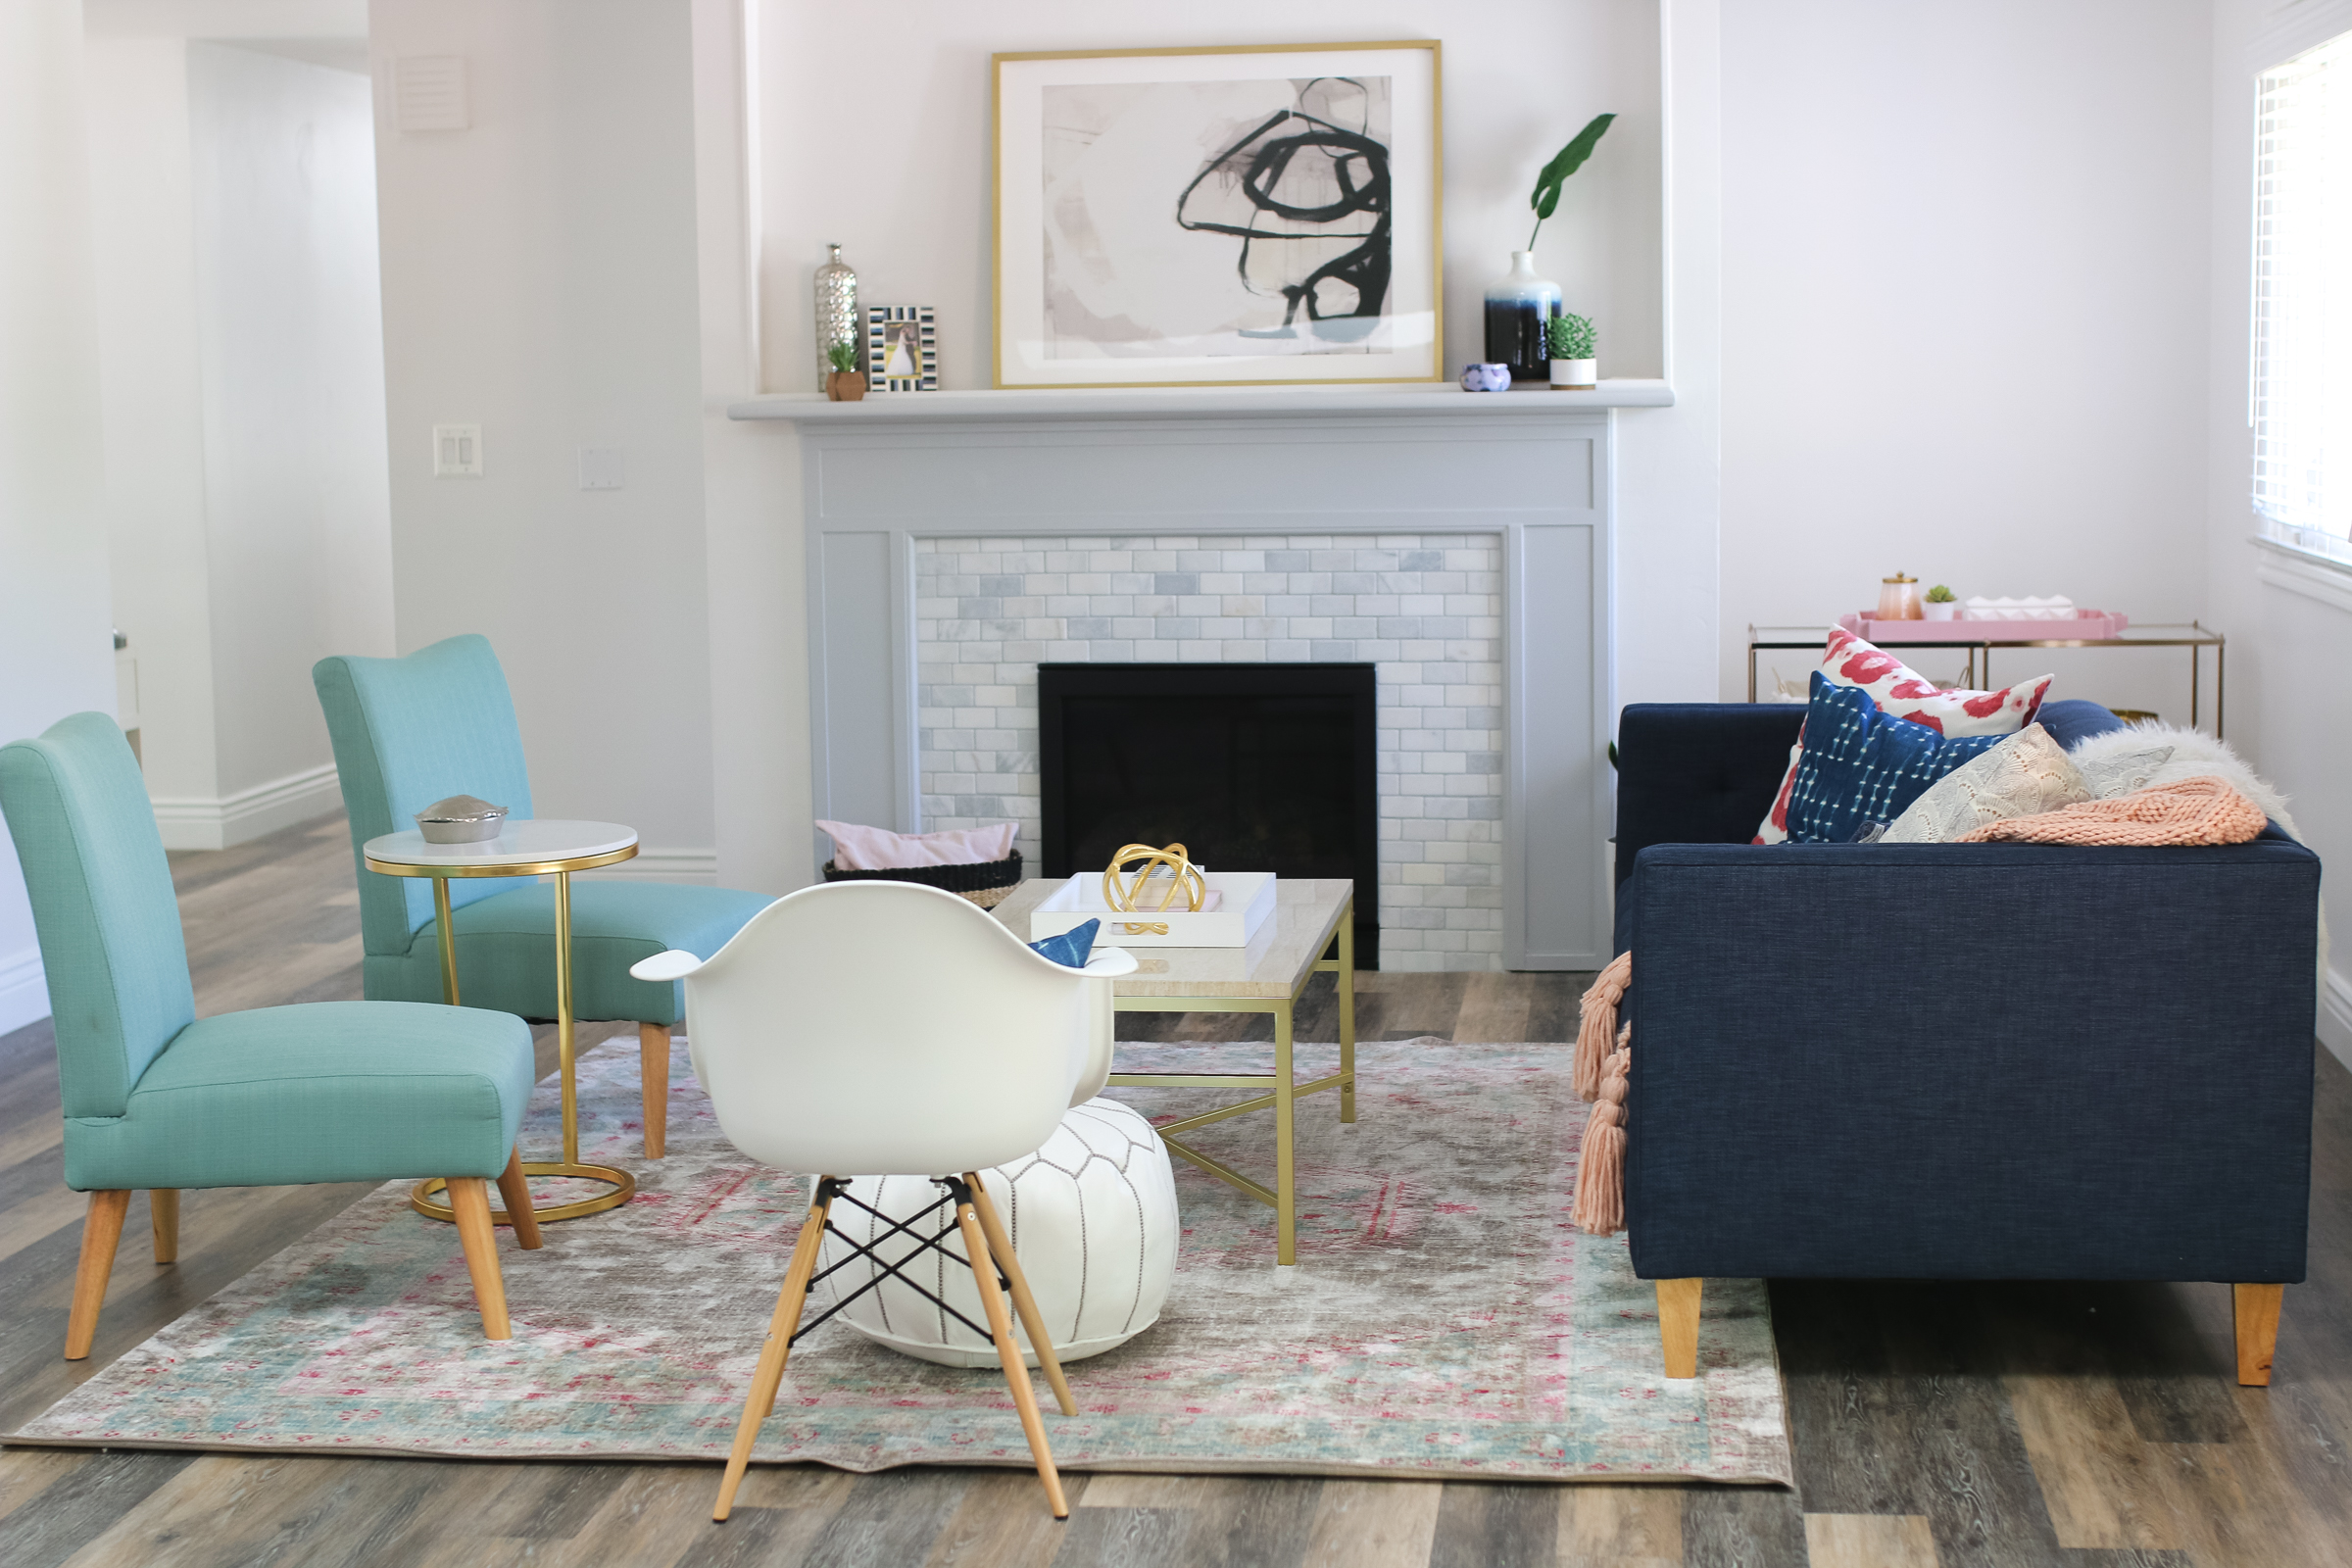 Our New Home Big Reveal: Our Modern Living Room With Hints of Gold by Utah blogger Sandy A La Mode